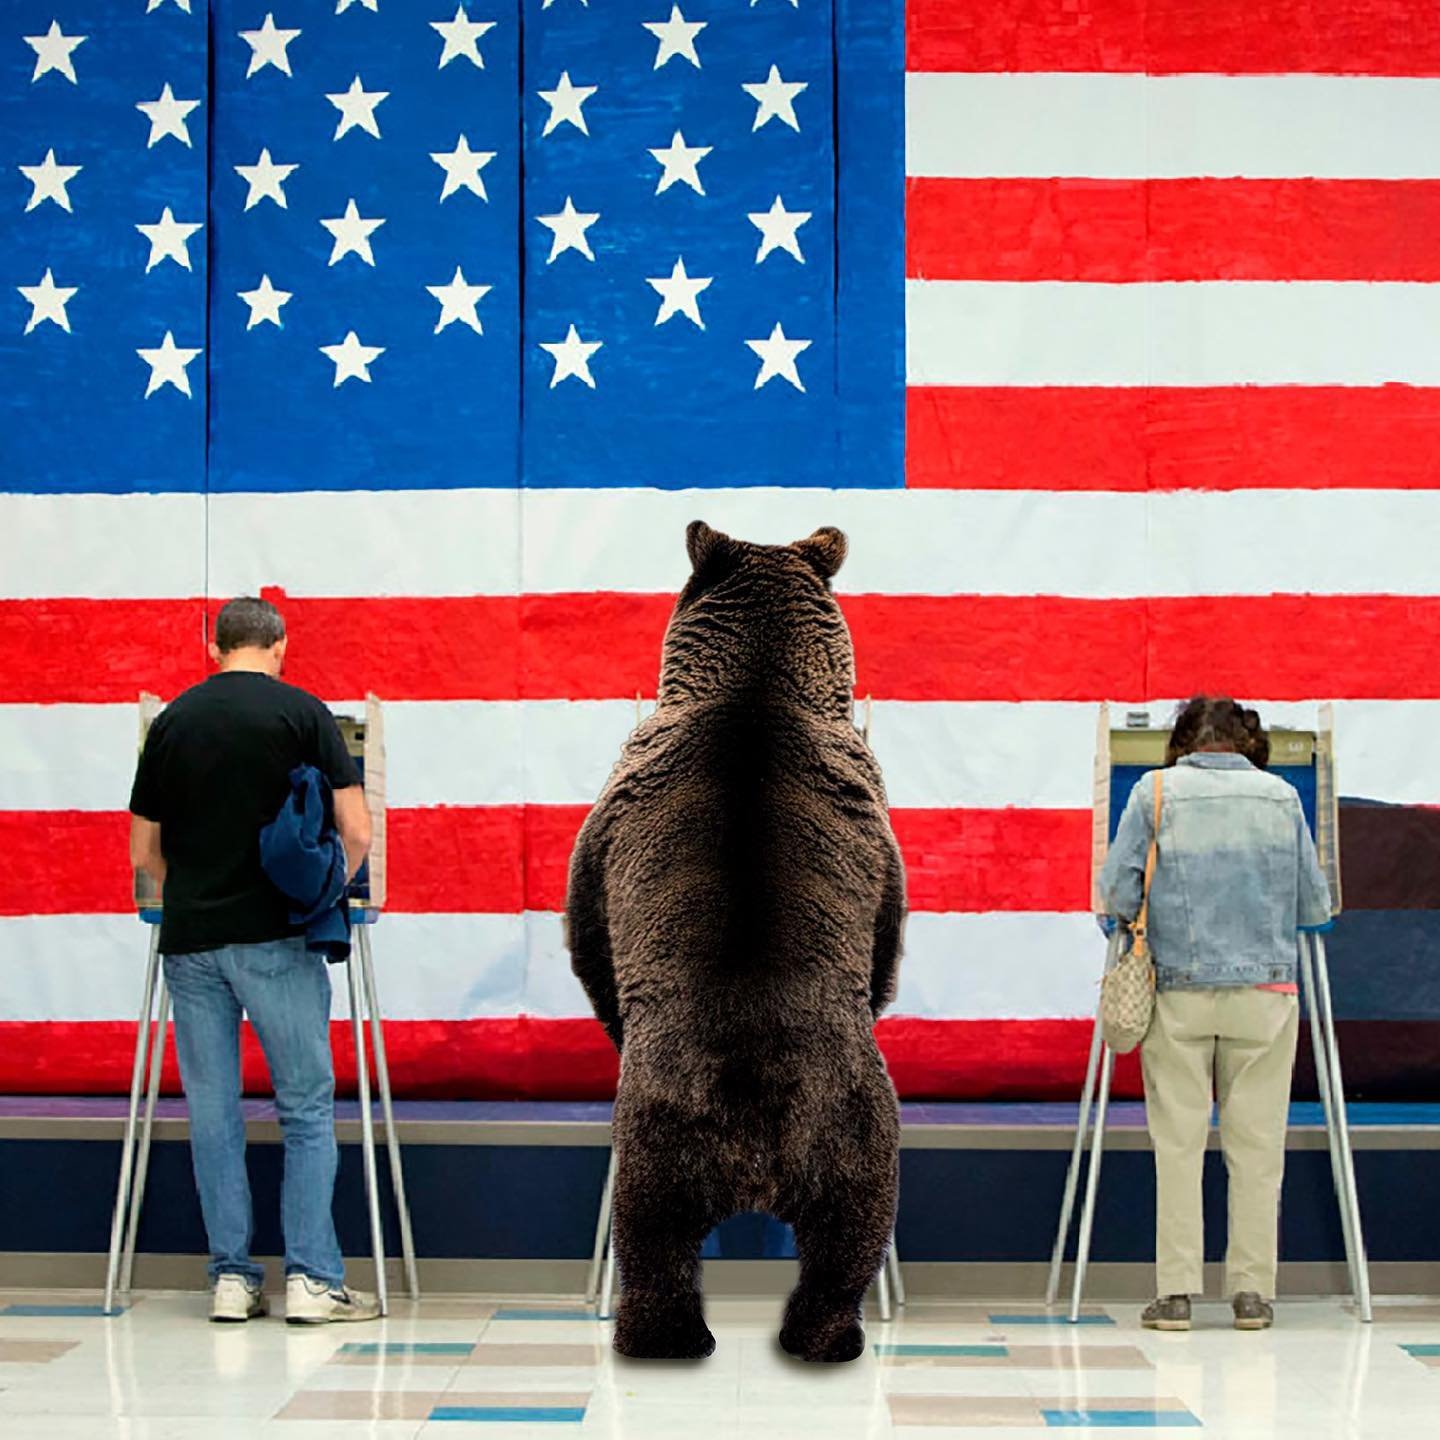 Animals can&rsquo;t vote so it&rsquo;s even more important that YOU DO! Vote for candidates that will protect the 🌲🐻🌸 these midterm elections